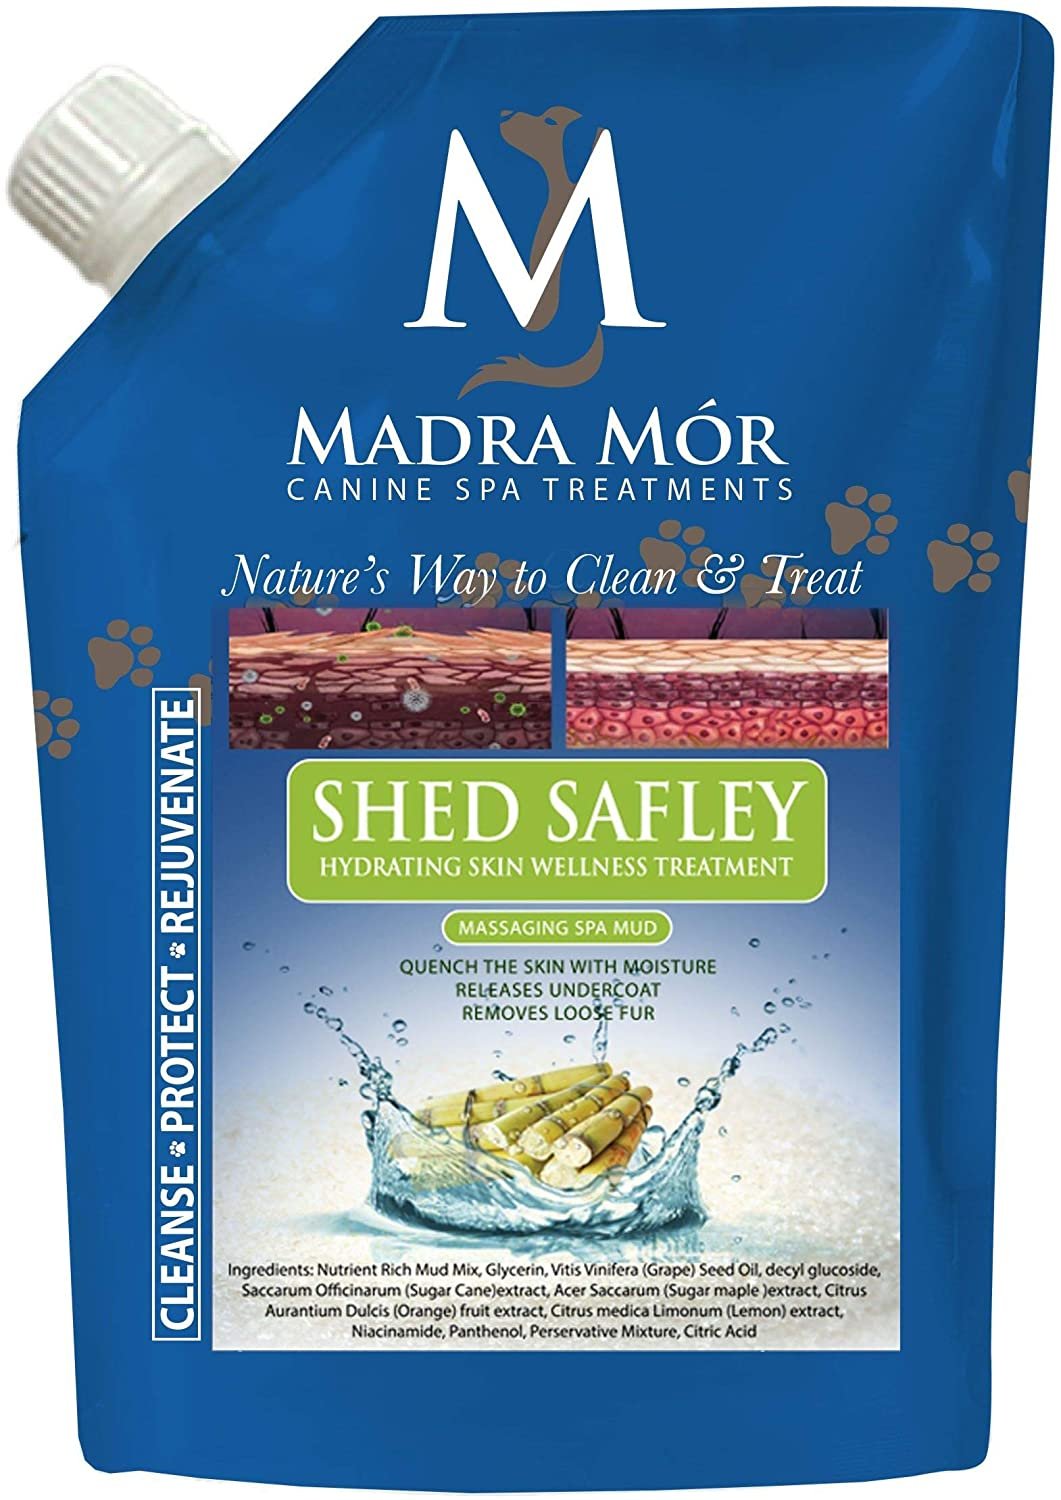 Madra Mor Mud Bath for Dogs - 10 oz Pouch, Detox, Nourish, Cleanse, Protect, Rejuvenate, Healthy Canine Skin, Spa Treatment with Easy Seal Cap, Travel Pouch